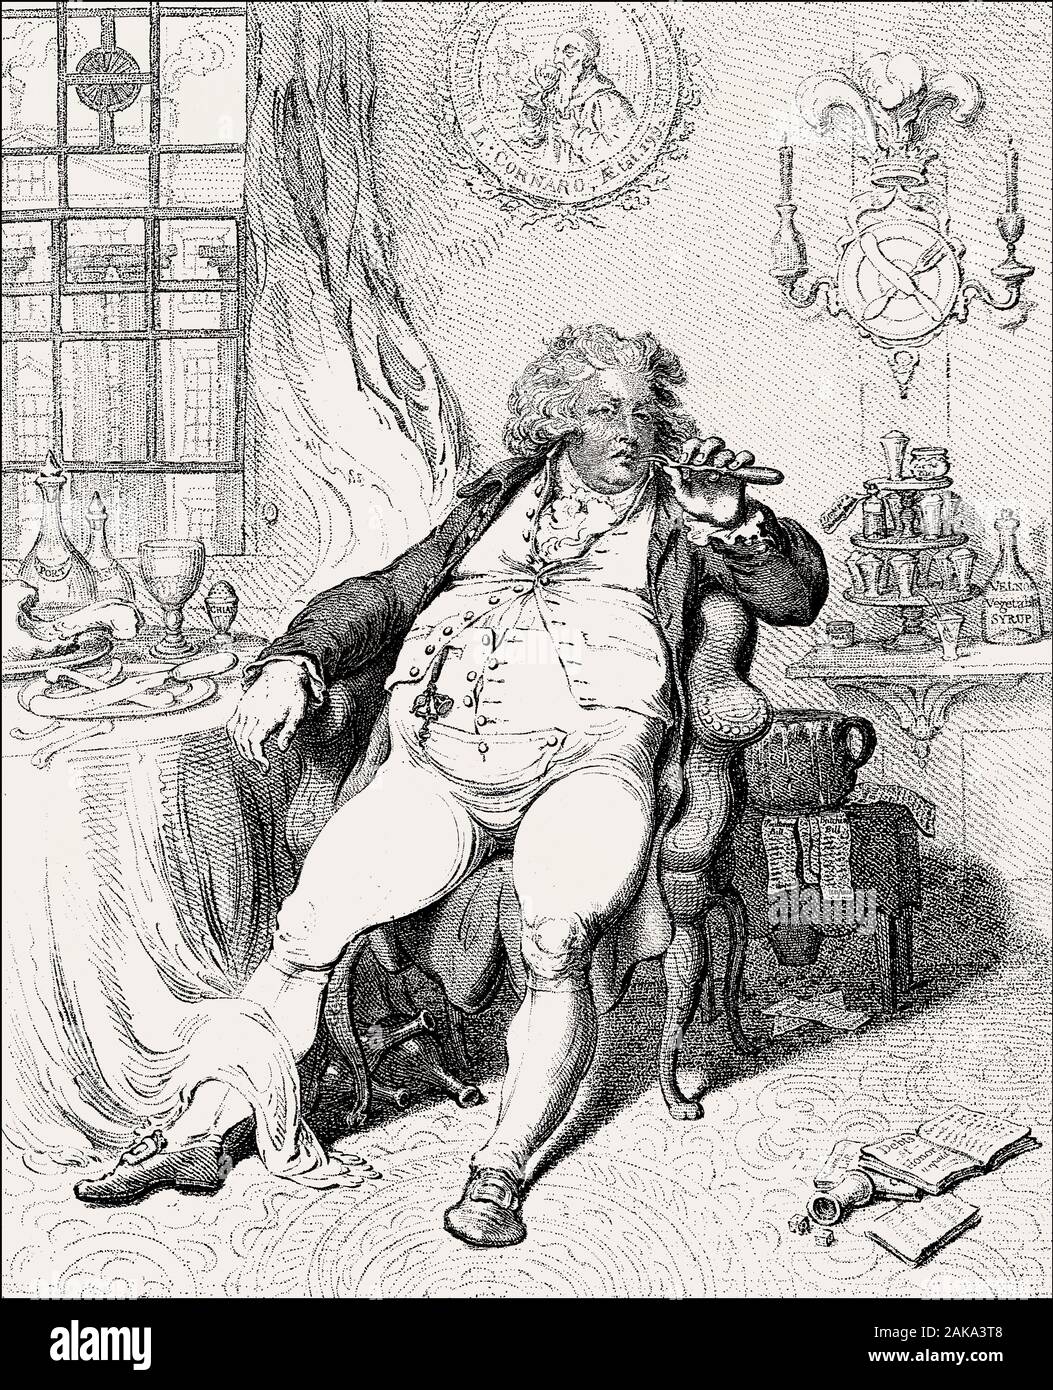 Caricature about George IV, King of Great Britain, by James Gillray, 1792 Stock Photo